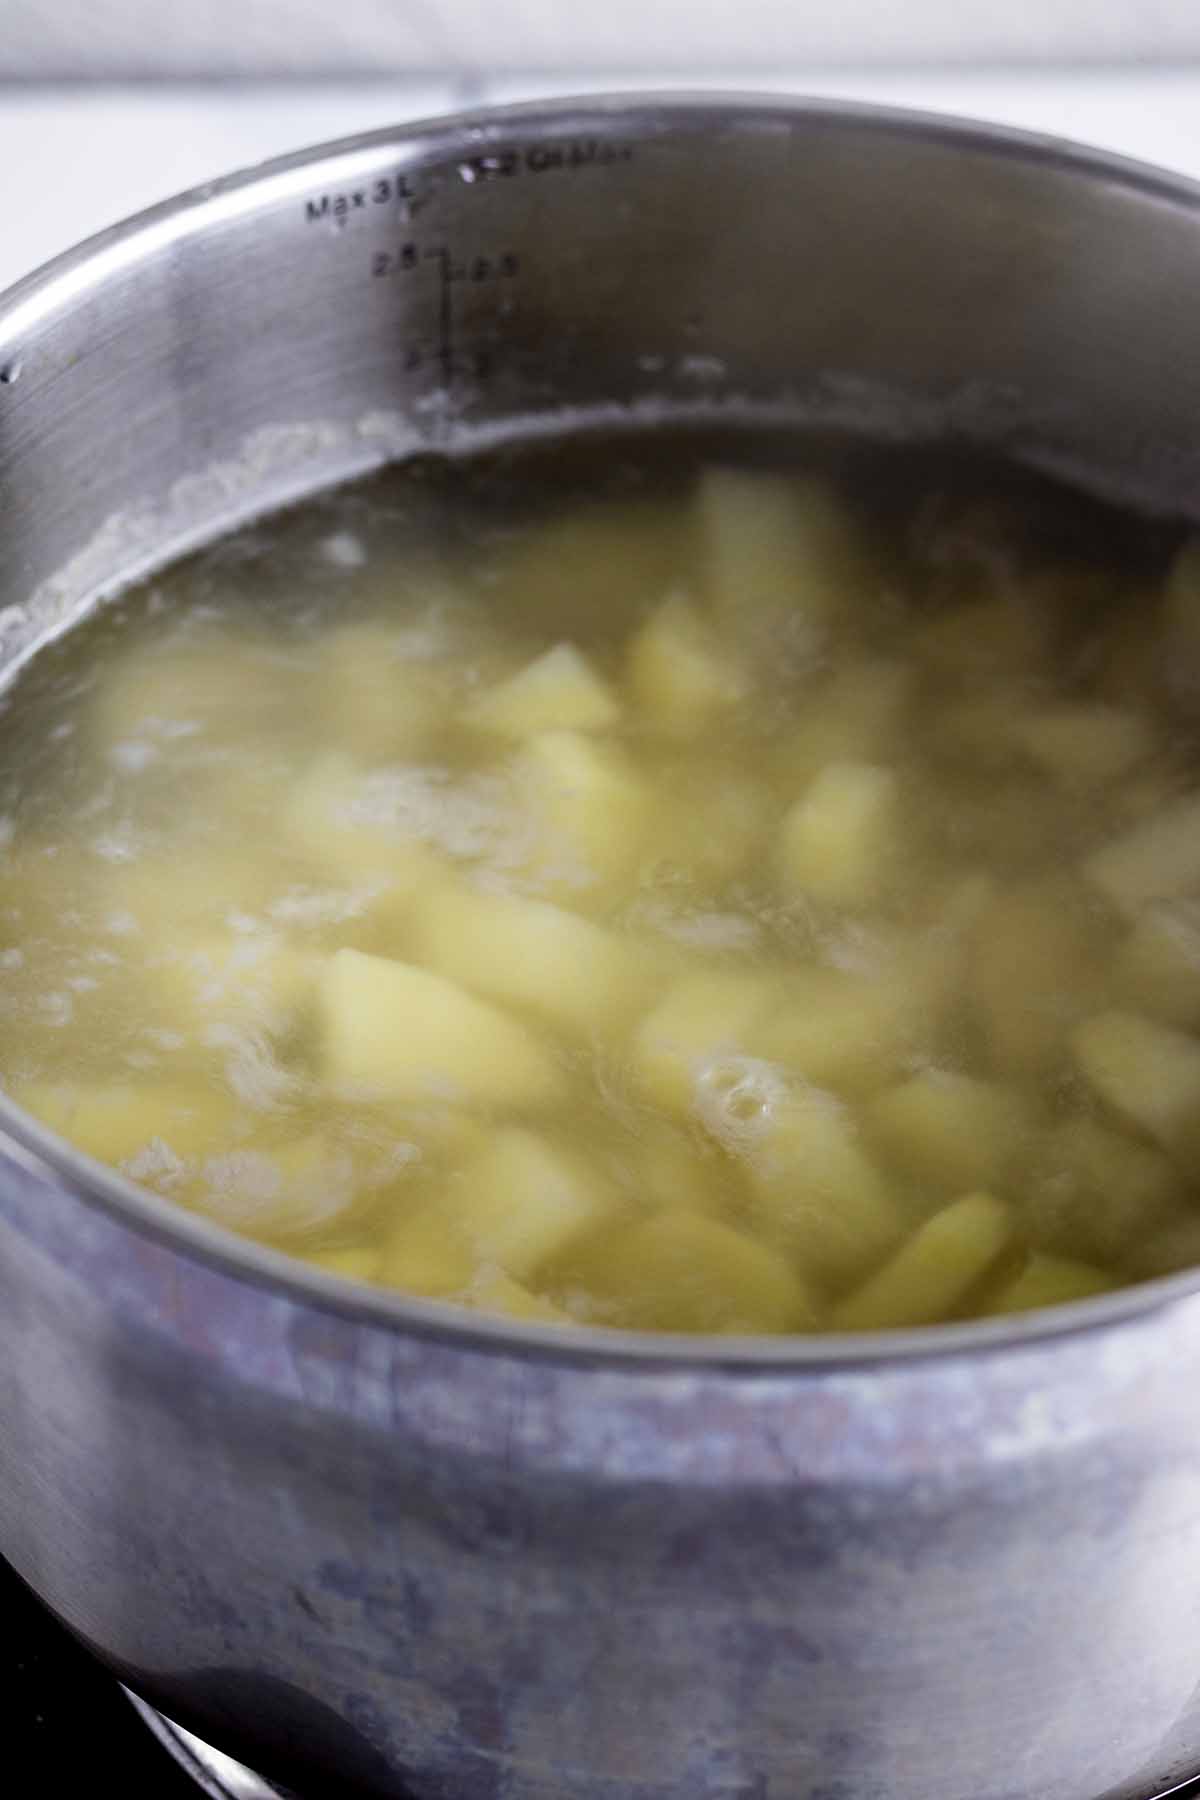 Peeled and chopped potatoes cooking in a saucepan